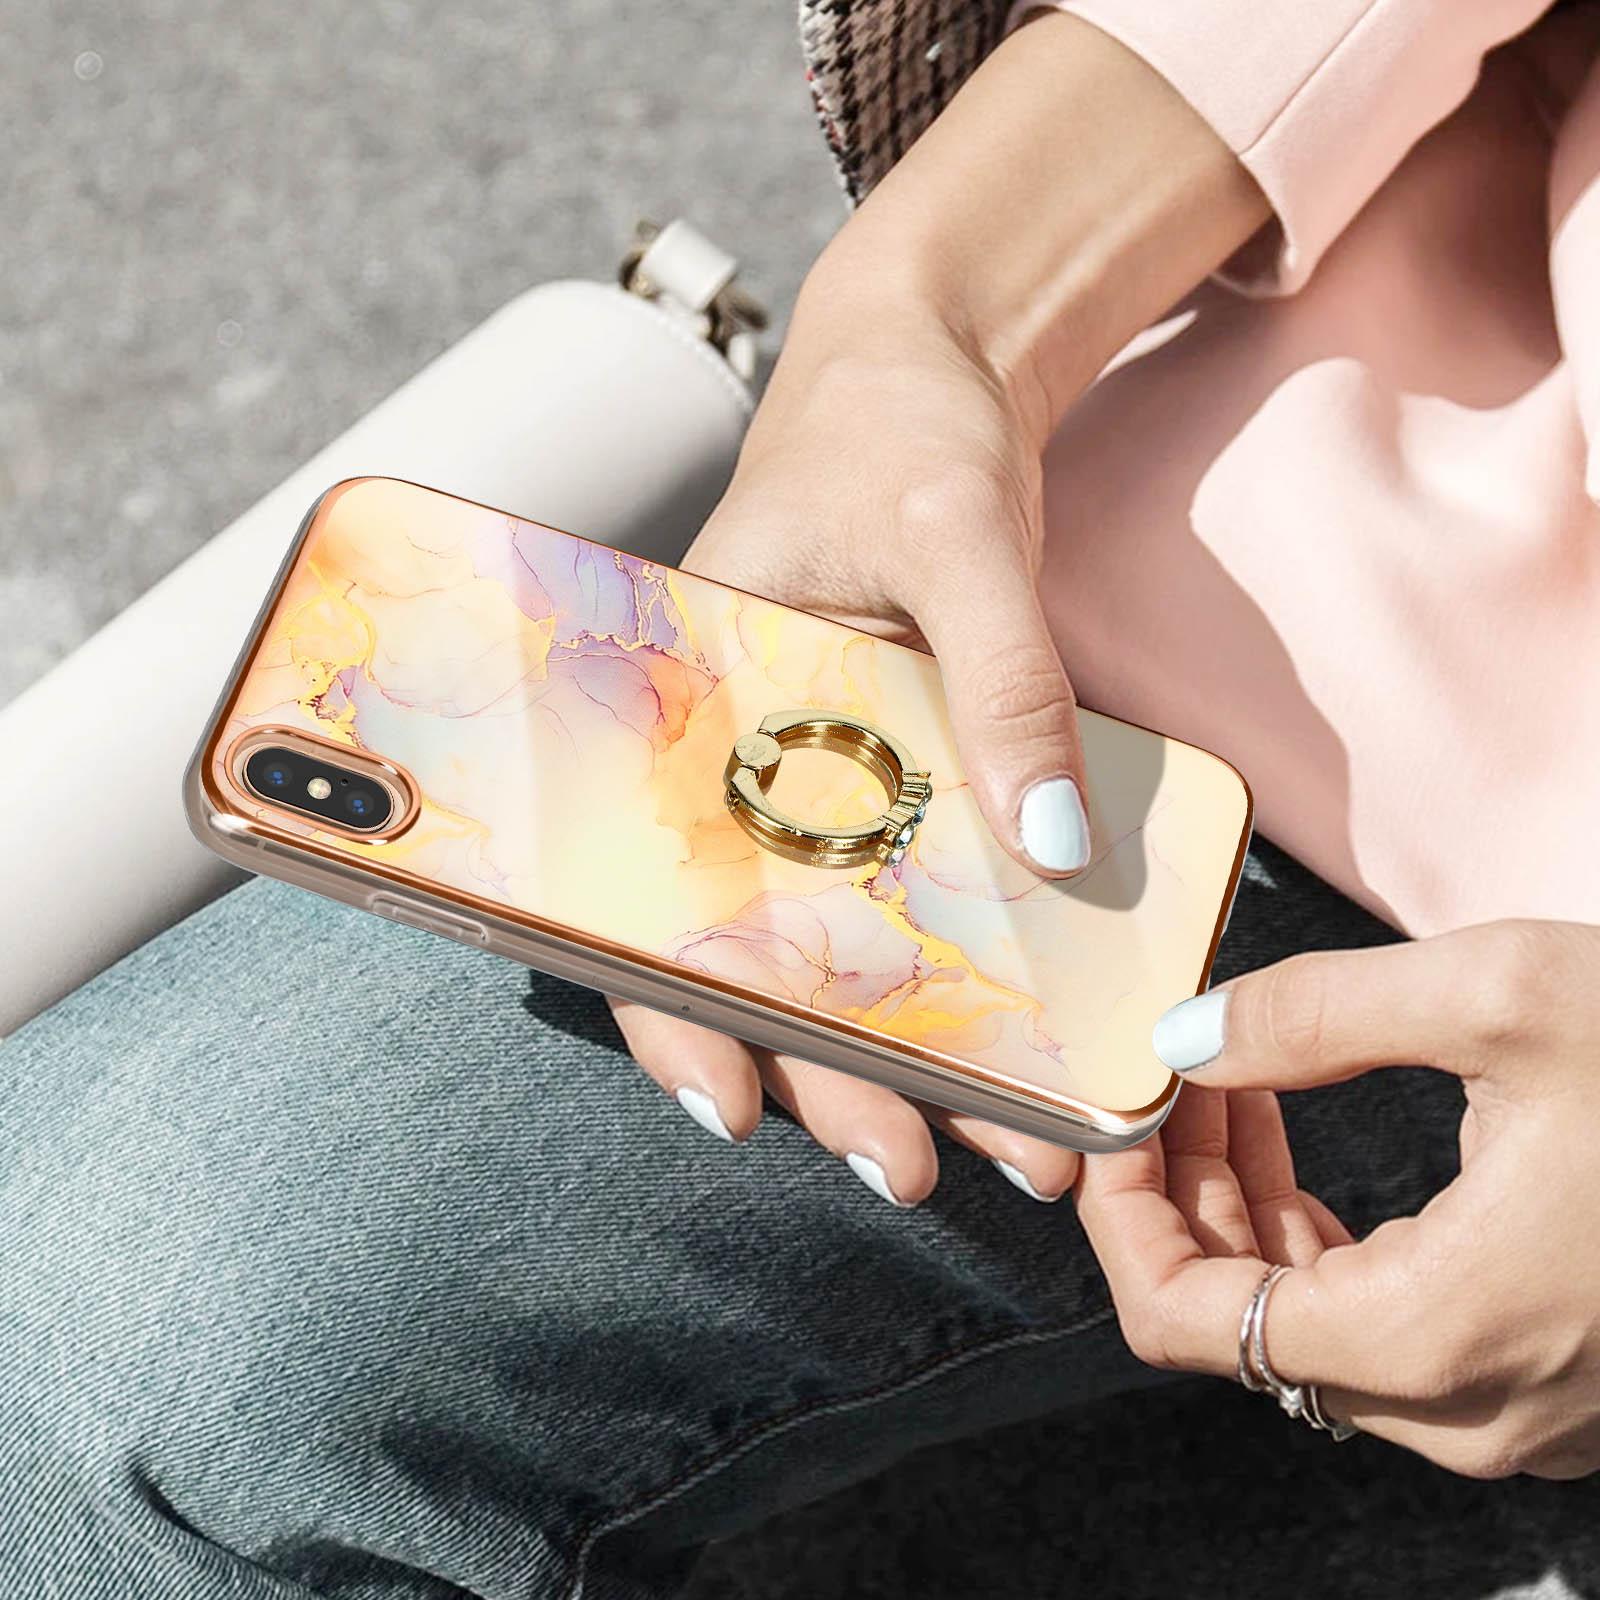 Rosegold Backcover, Apple, iPhone XS Series, Marmormuster AVIZAR Max,